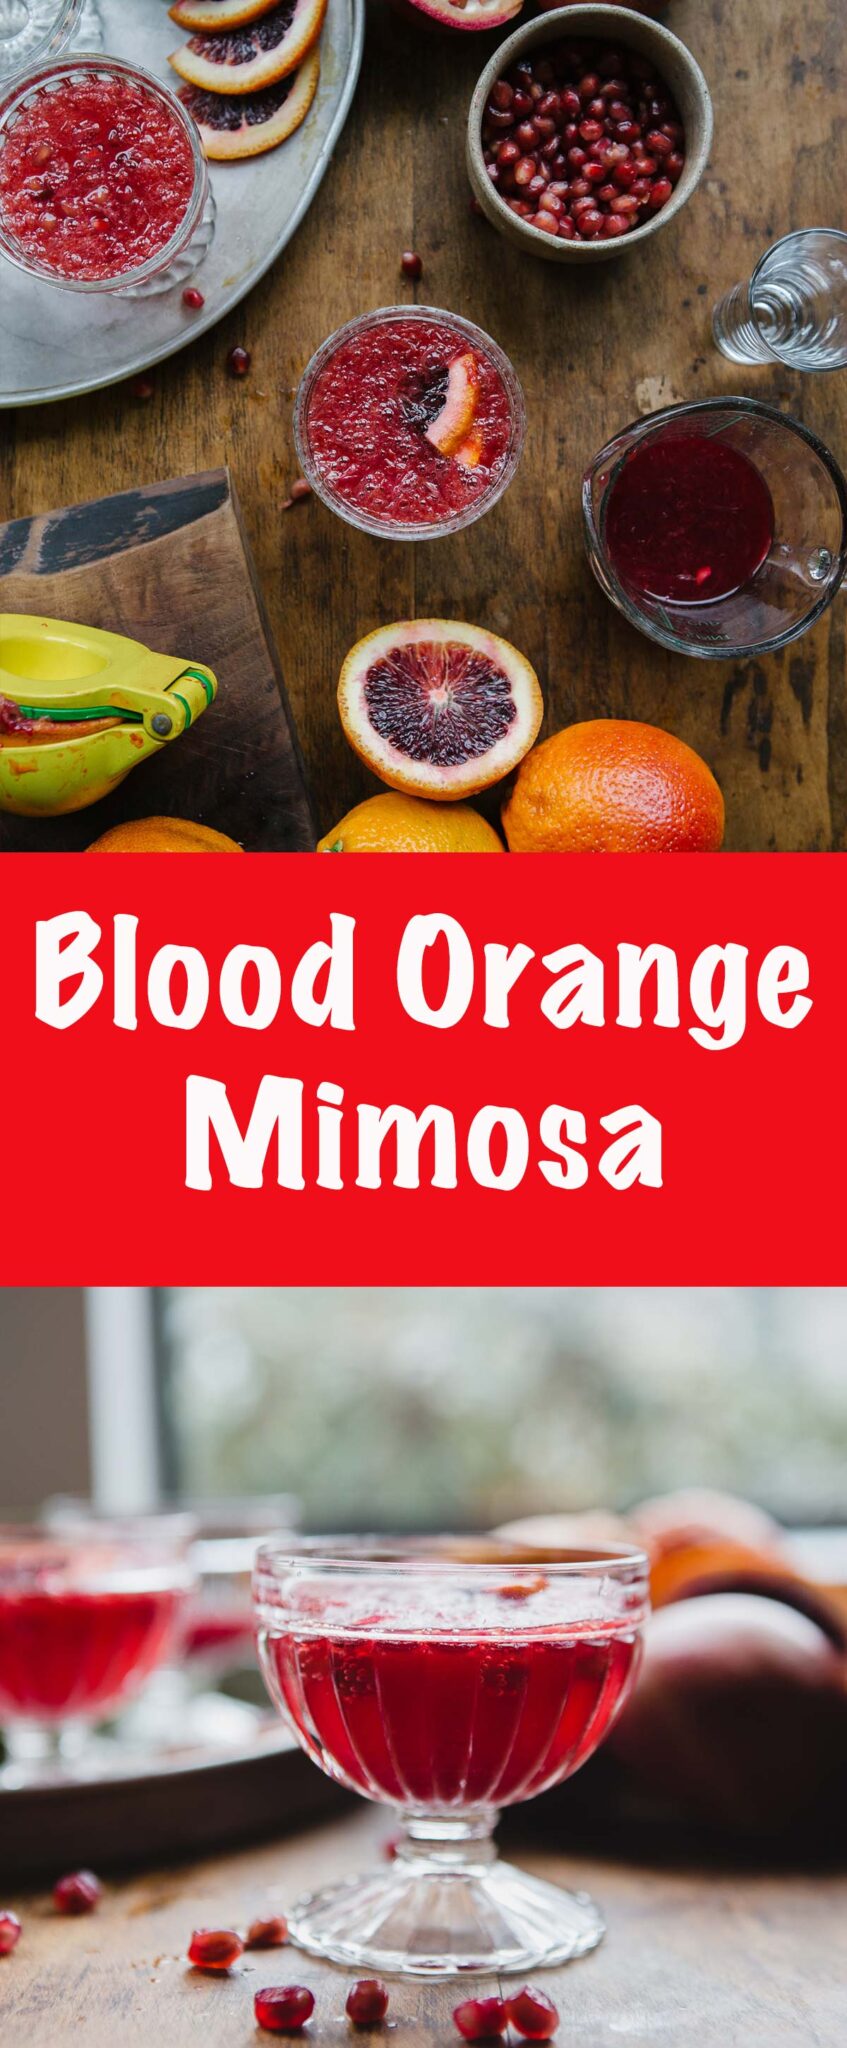 Blood Orange Mimosa is the perfect combination of blood orange, pomegranate seeds, add some tequila and sparkling wine for a flavour party! #cocktail 